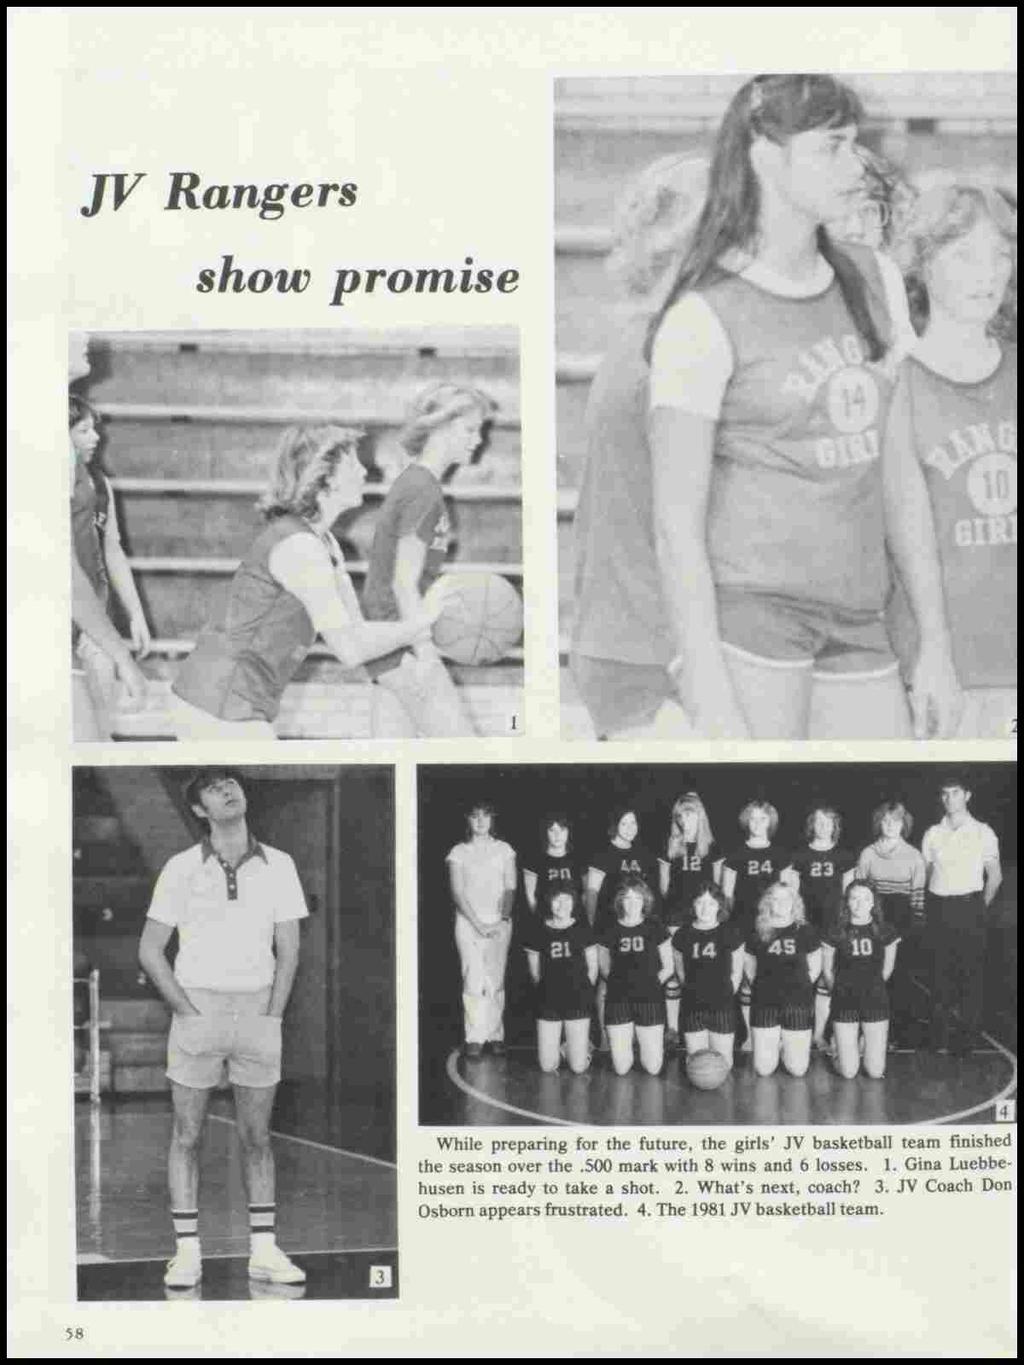 JV Rangers show promise While preparing for the future, the girls' JV basketball team finished the season over the.